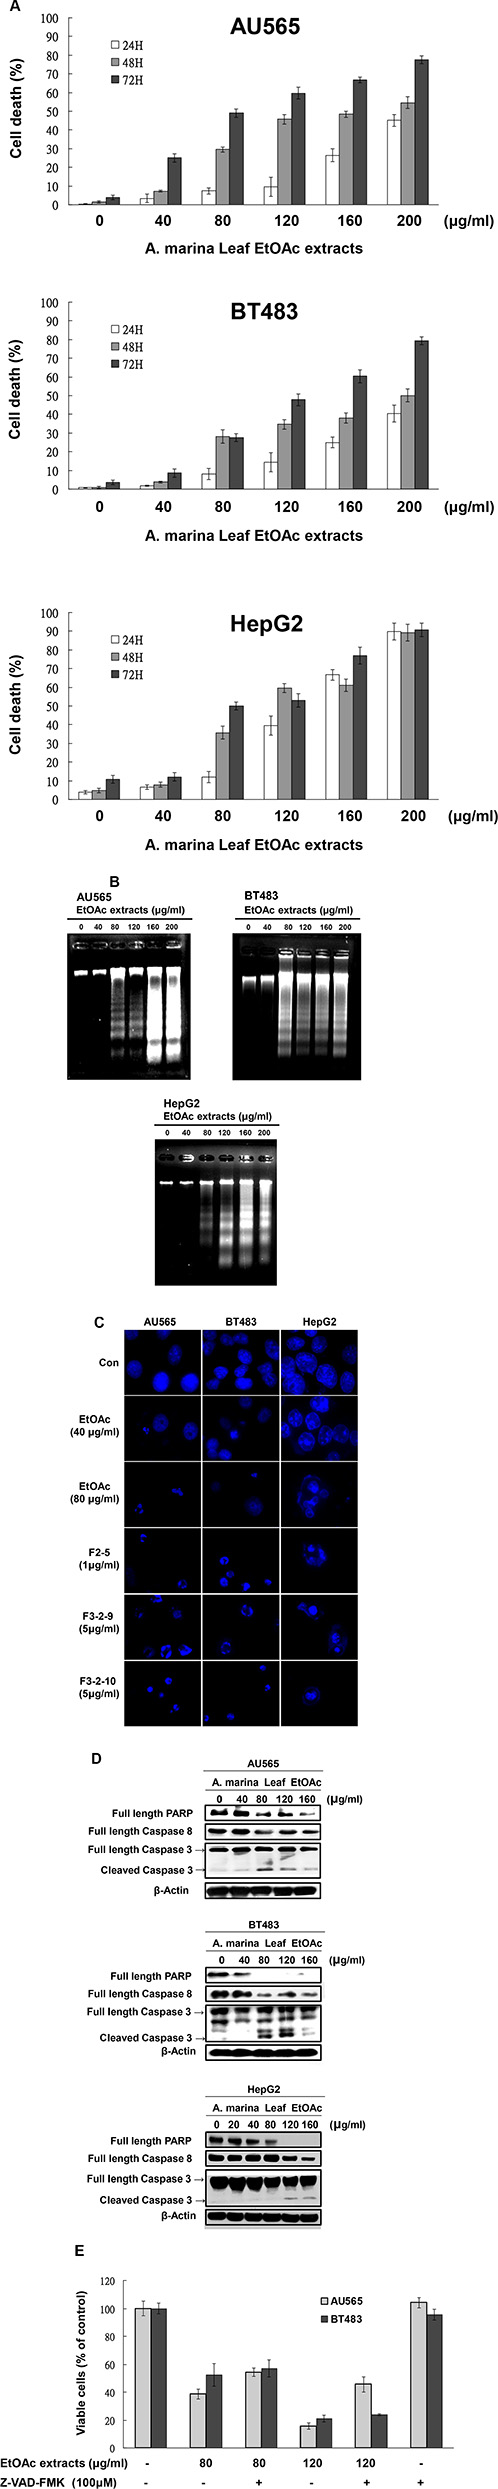 EtOAc extracts of A. marina leaves induced apoptosis in AU565, BT483, and HepG2 cells.